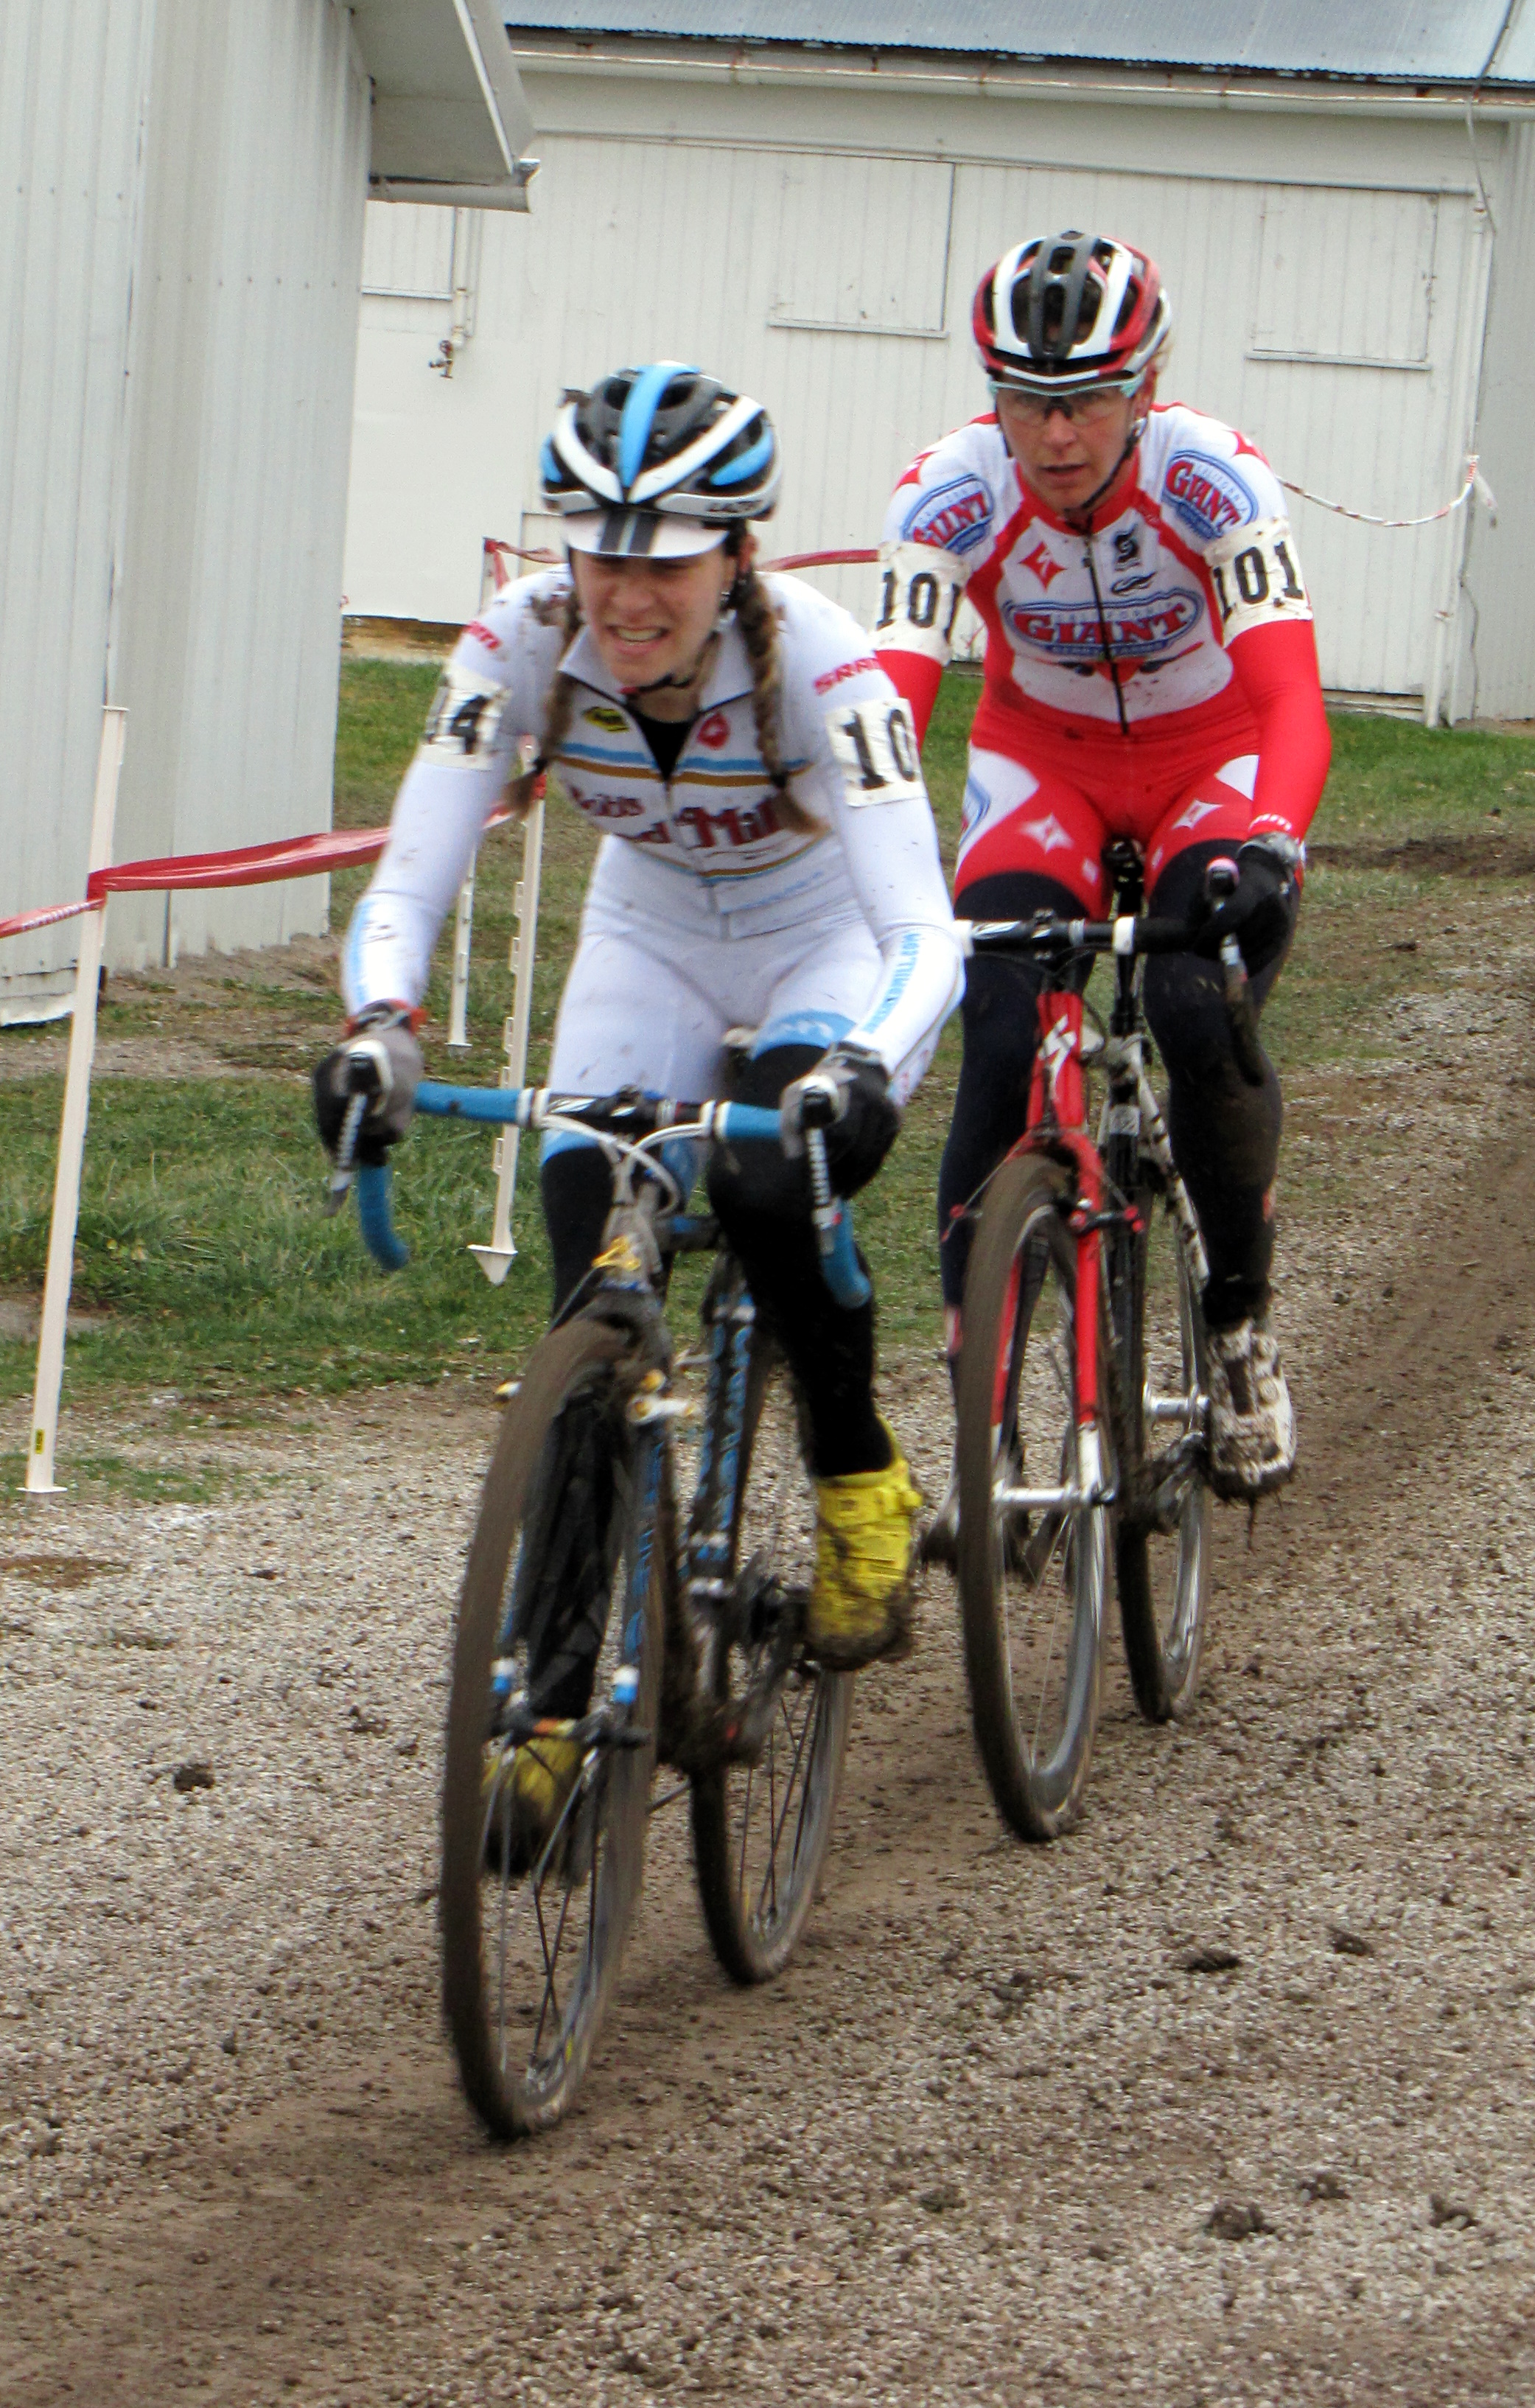 Bruno Roy and Meridth Miller lead in the early laps.